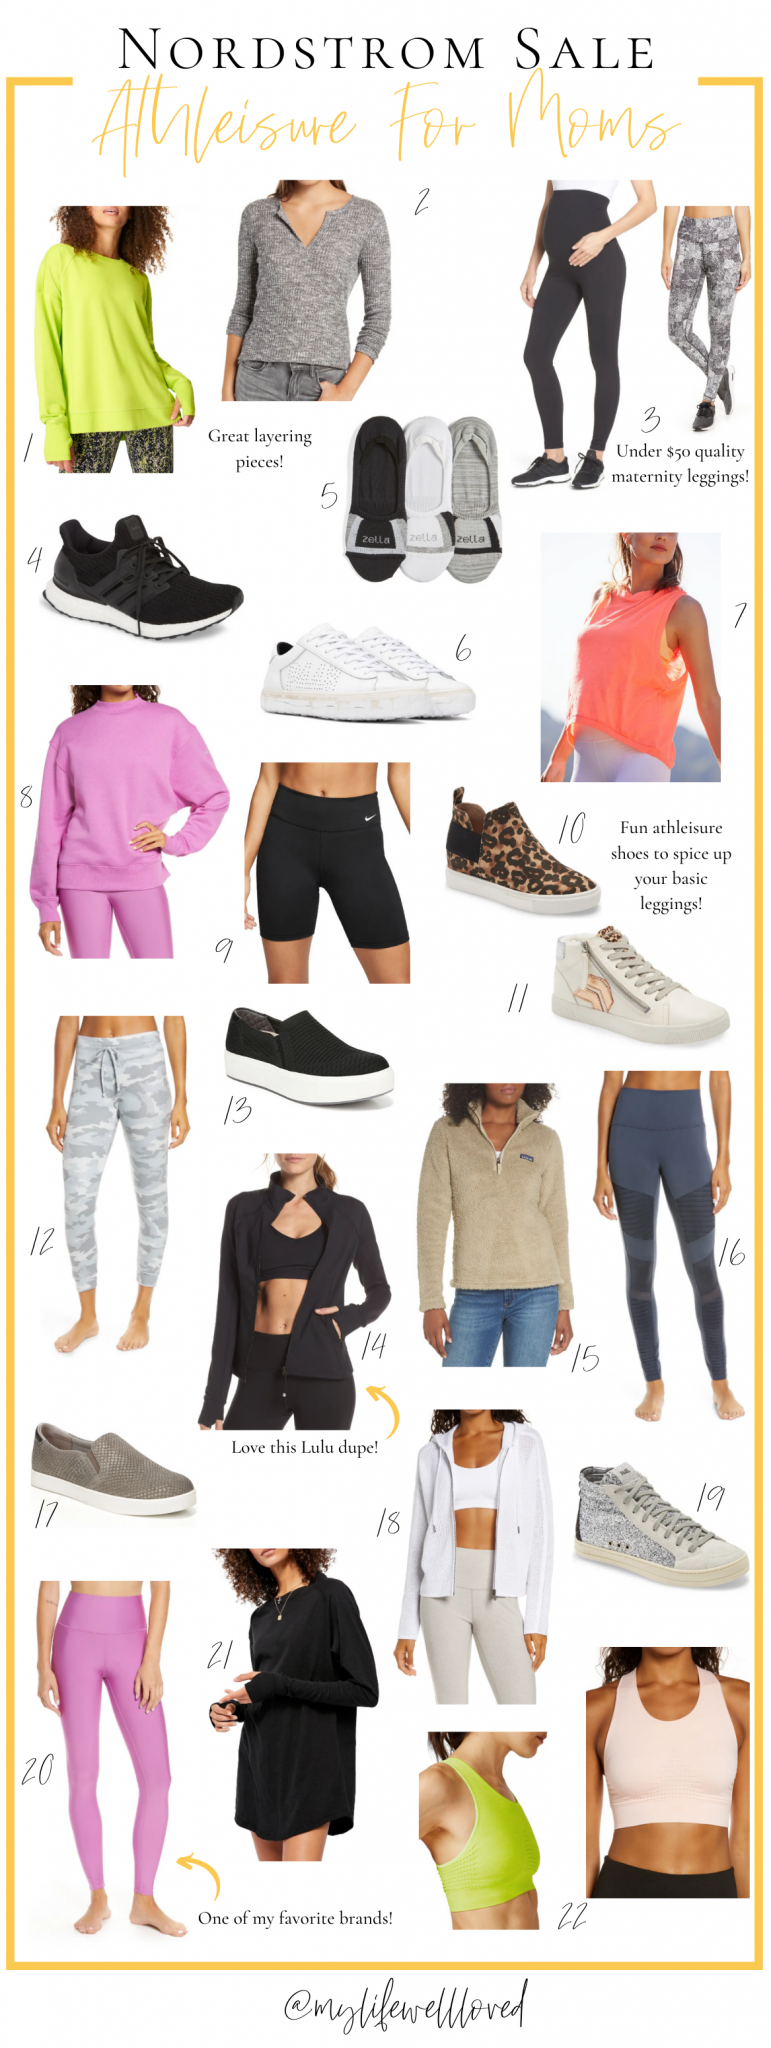 Nordstrom Anniversary Sale, Everything You Need to Know!